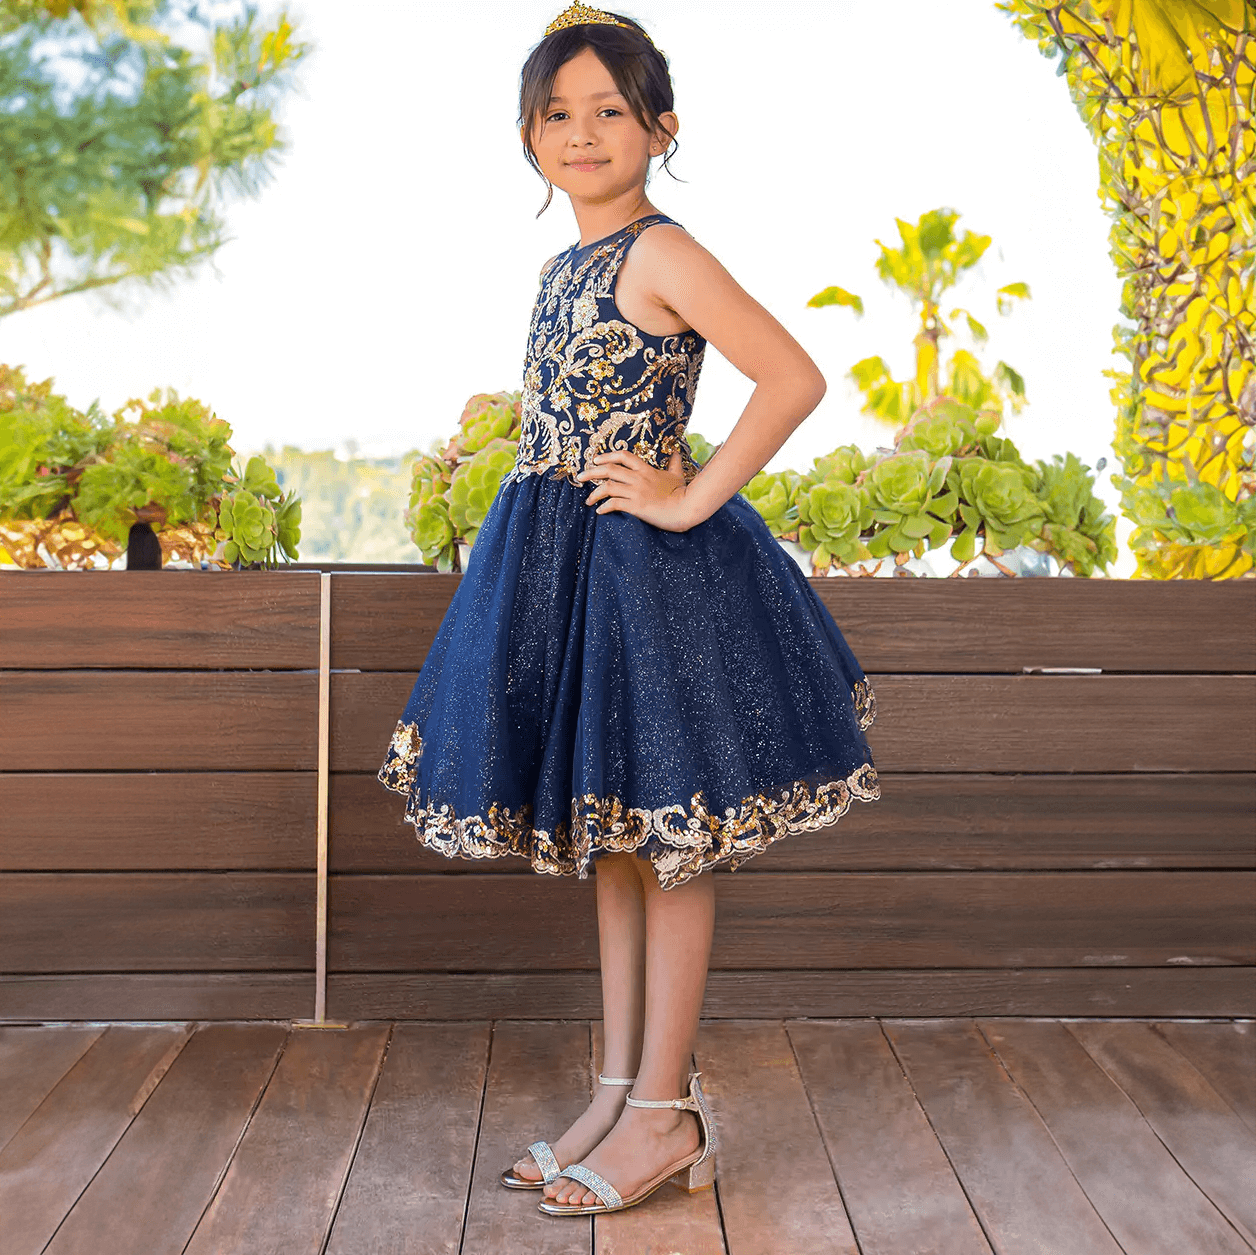 Girl wearing a beautiful navy and gold sequin dress